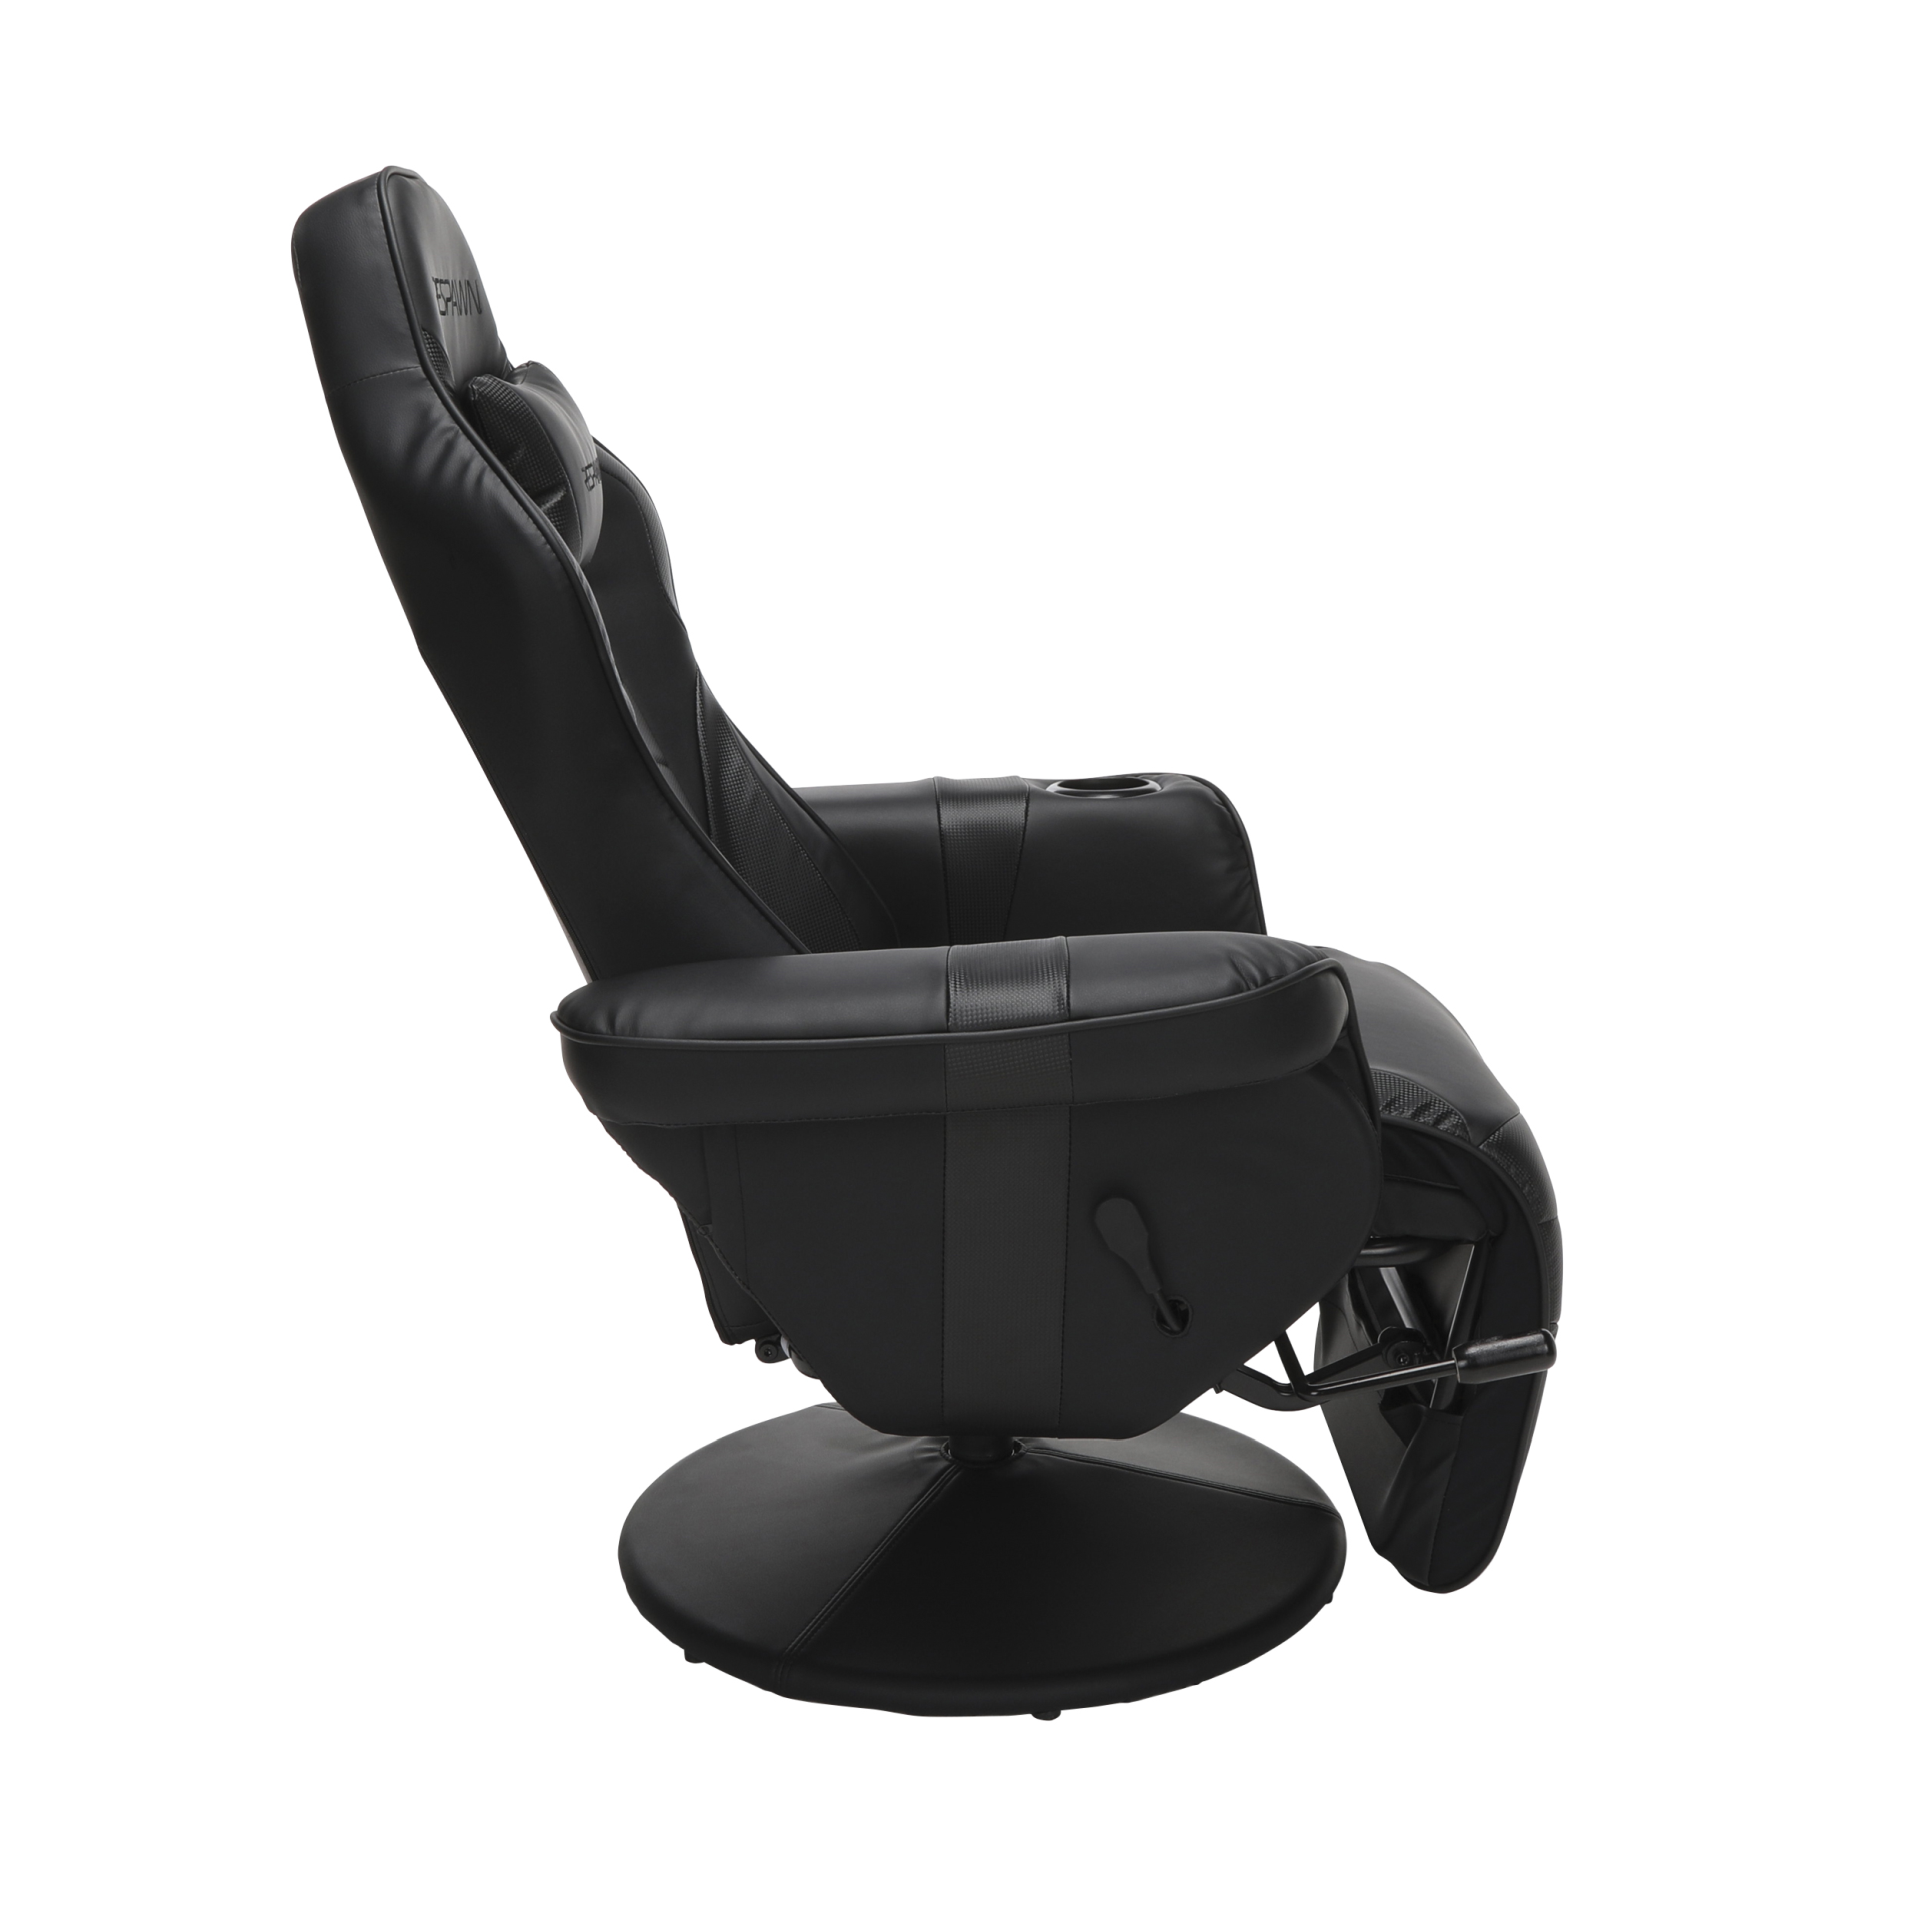 RESPAWN RSP-900 Gaming Recliner #5